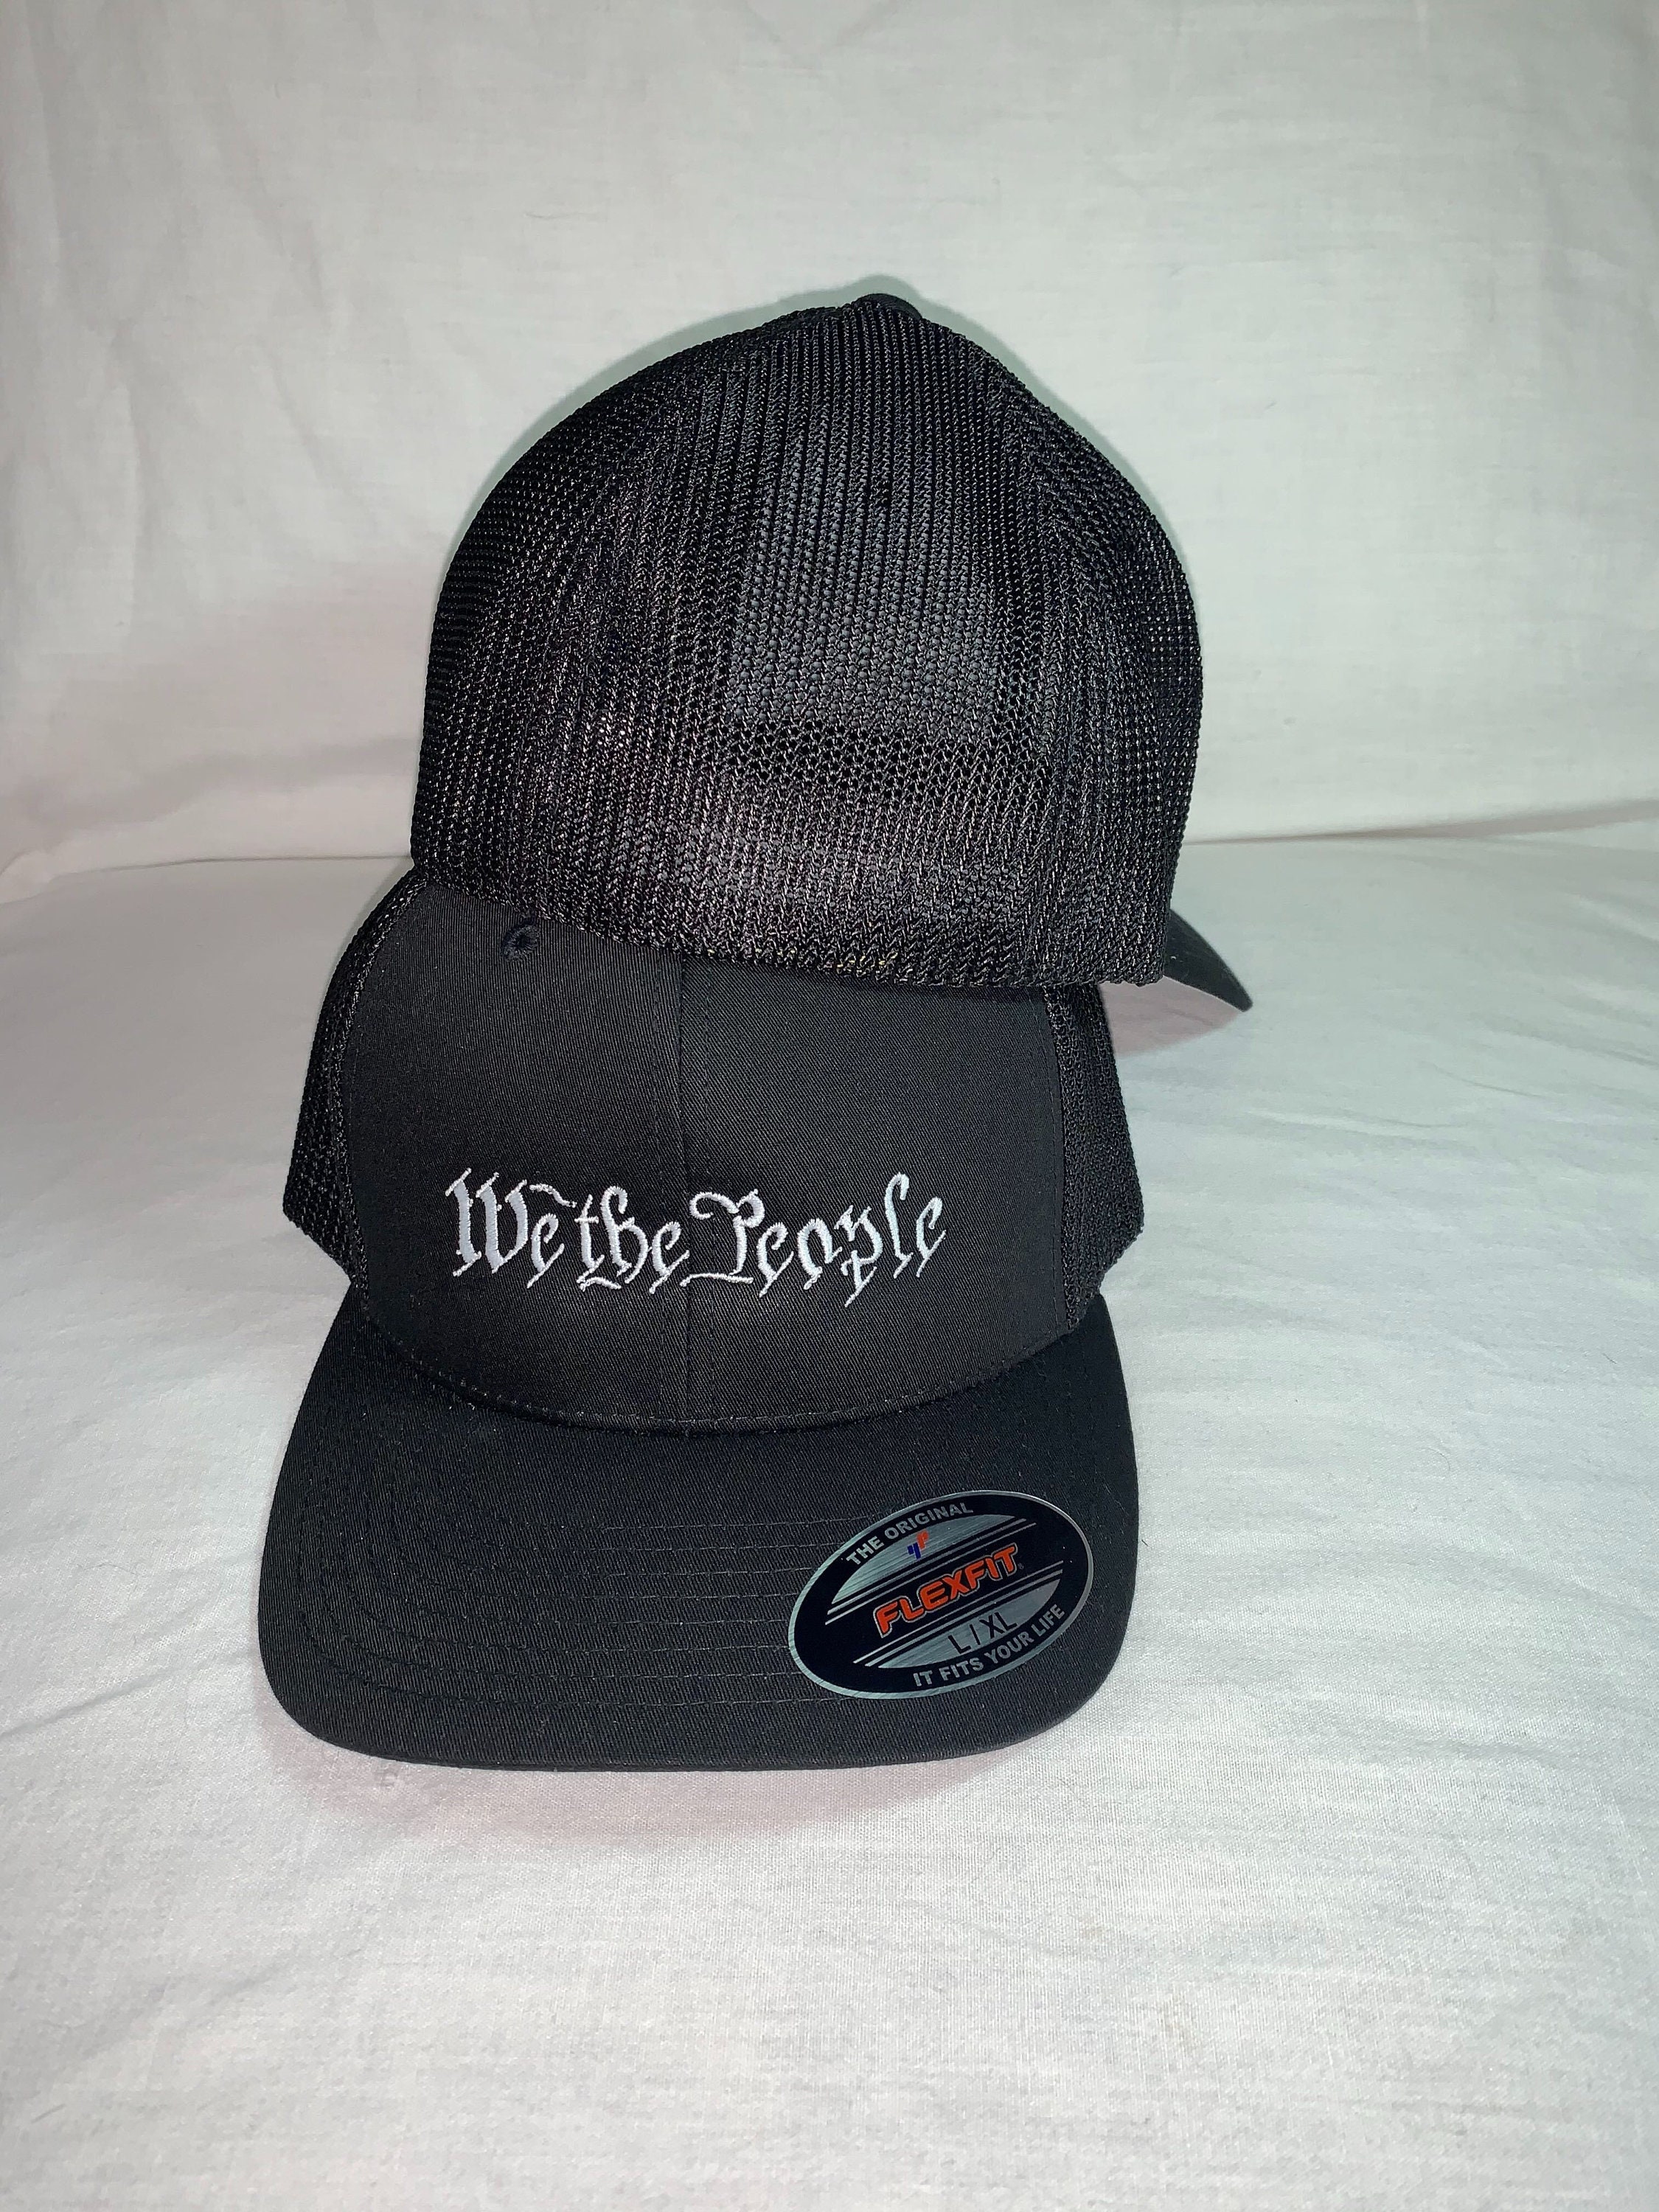 We the People Flex-fit Hat, United States Constitution Preamble - Etsy | 